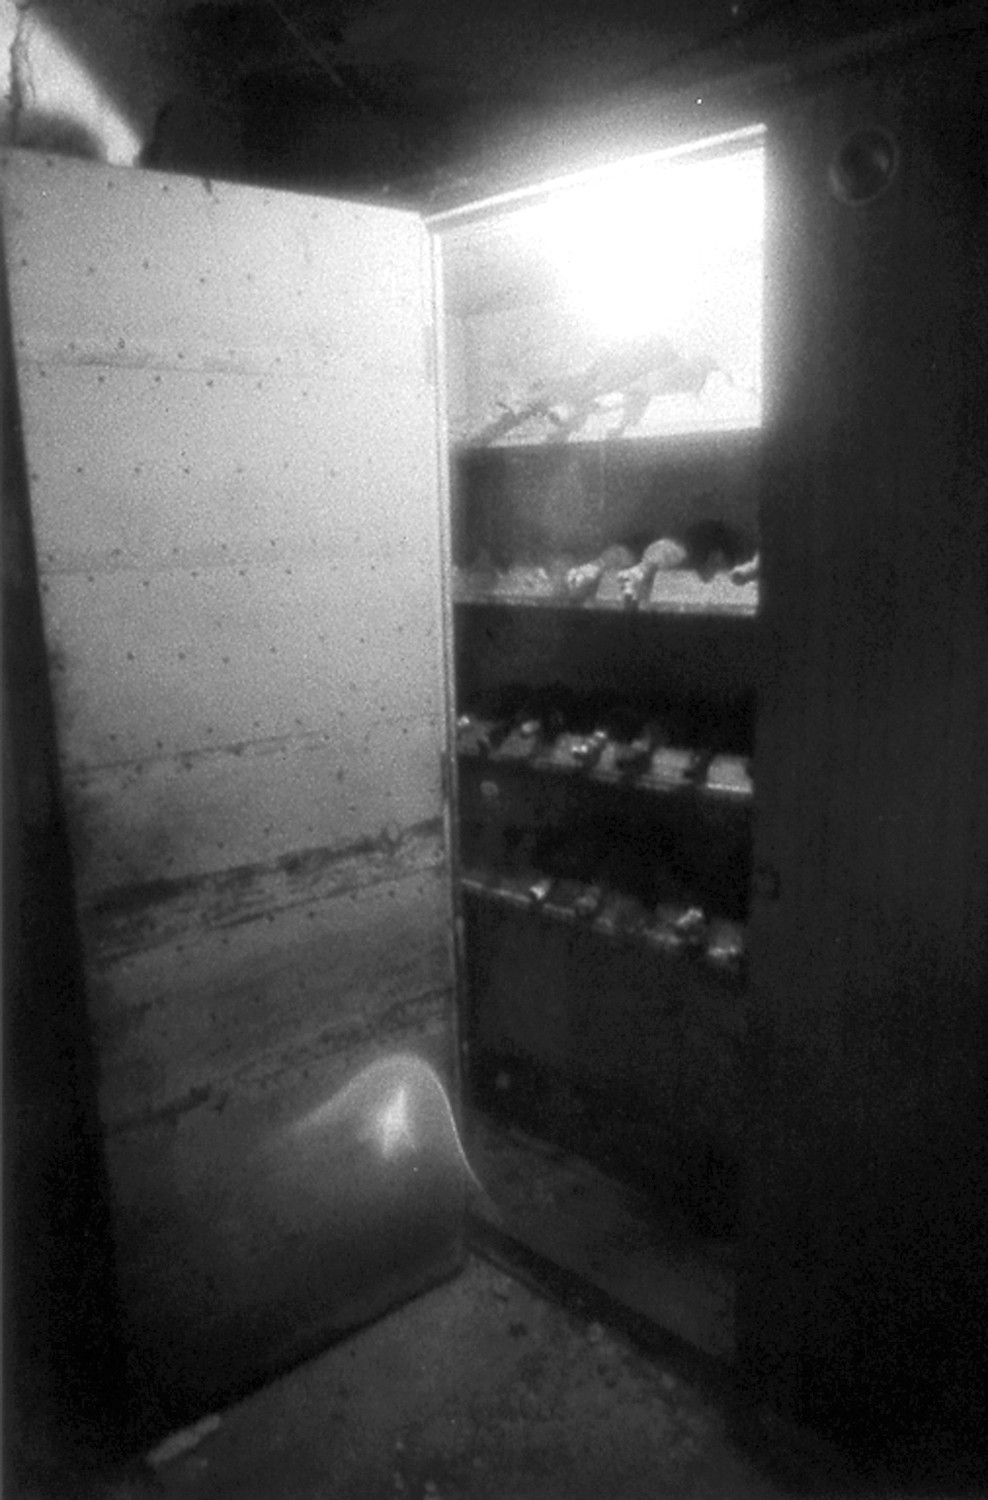 ORBS: Pictured are filmy white orbs captured by Cyril Place (a friend of Bell) taken with an infrared camera in the wine cellar of the Sprague Mansion.